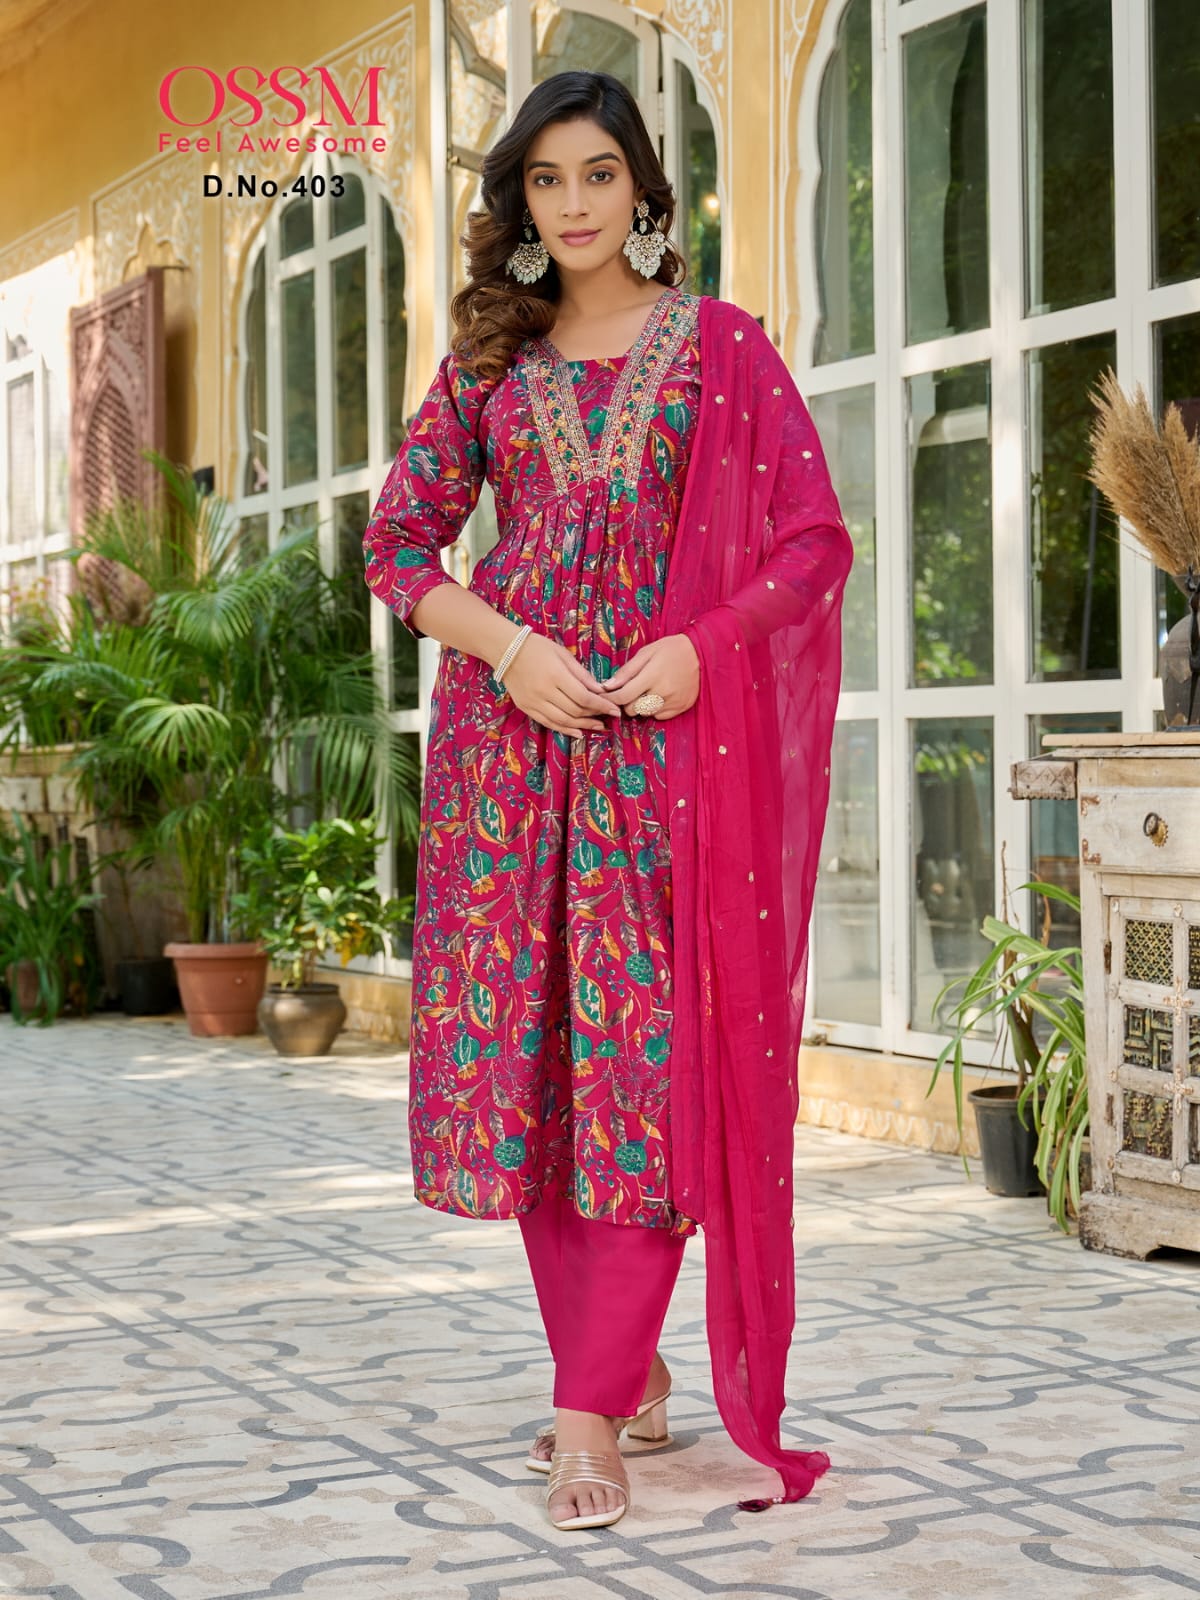 Ladies Flavour Srivalli Vol 2 Rayon With Printed Work Stylish Designer